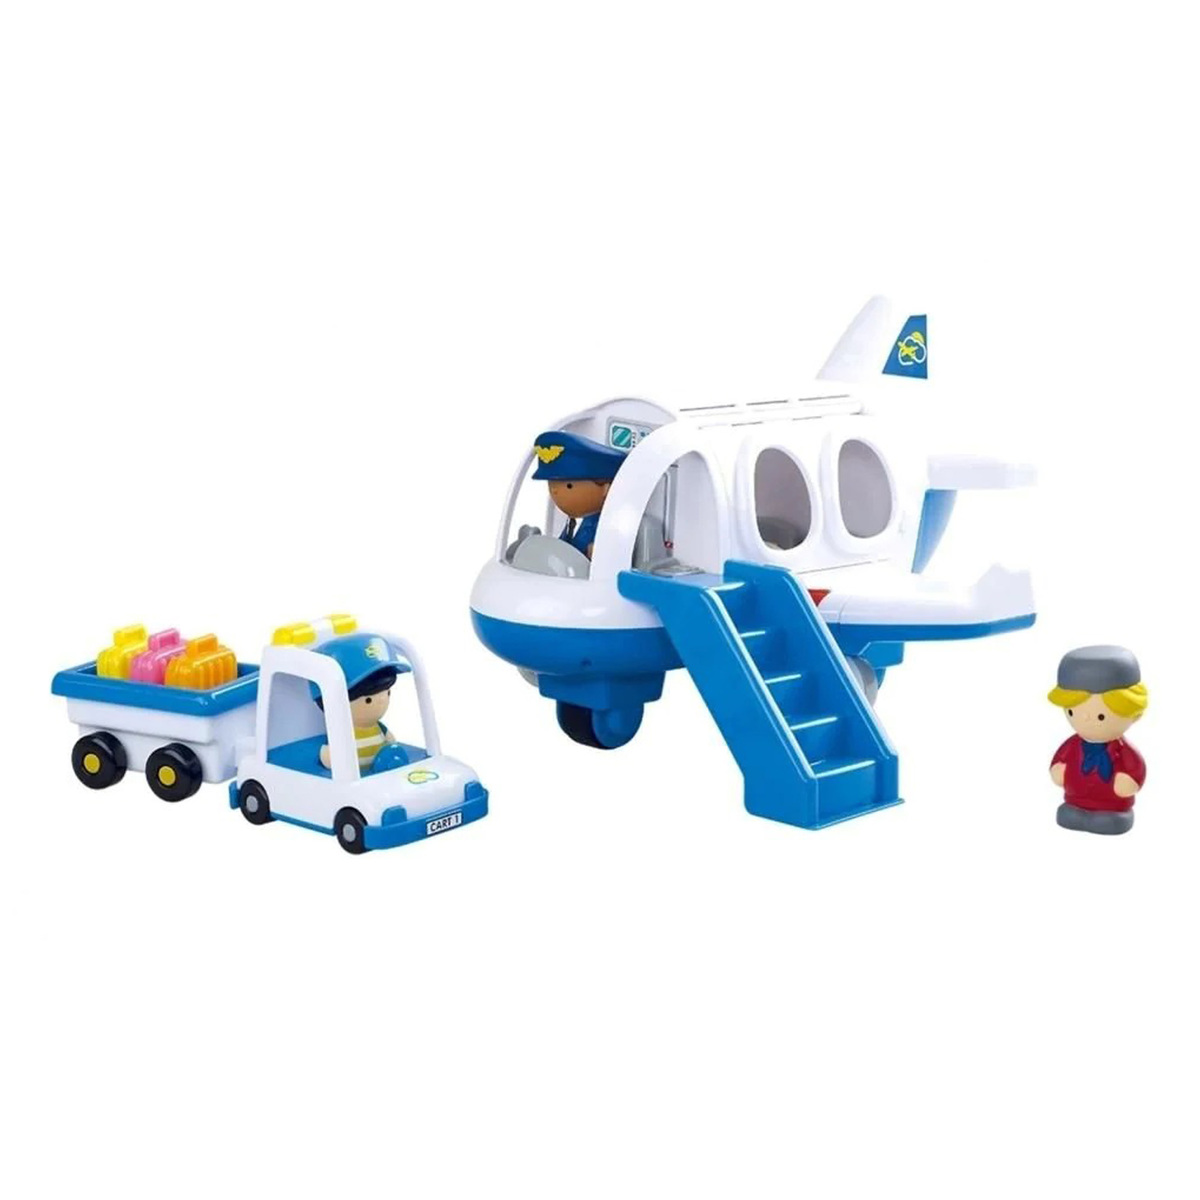 PlayGo Airplane Battery Operated 15 Pcs Playset, Multicolor, 9838